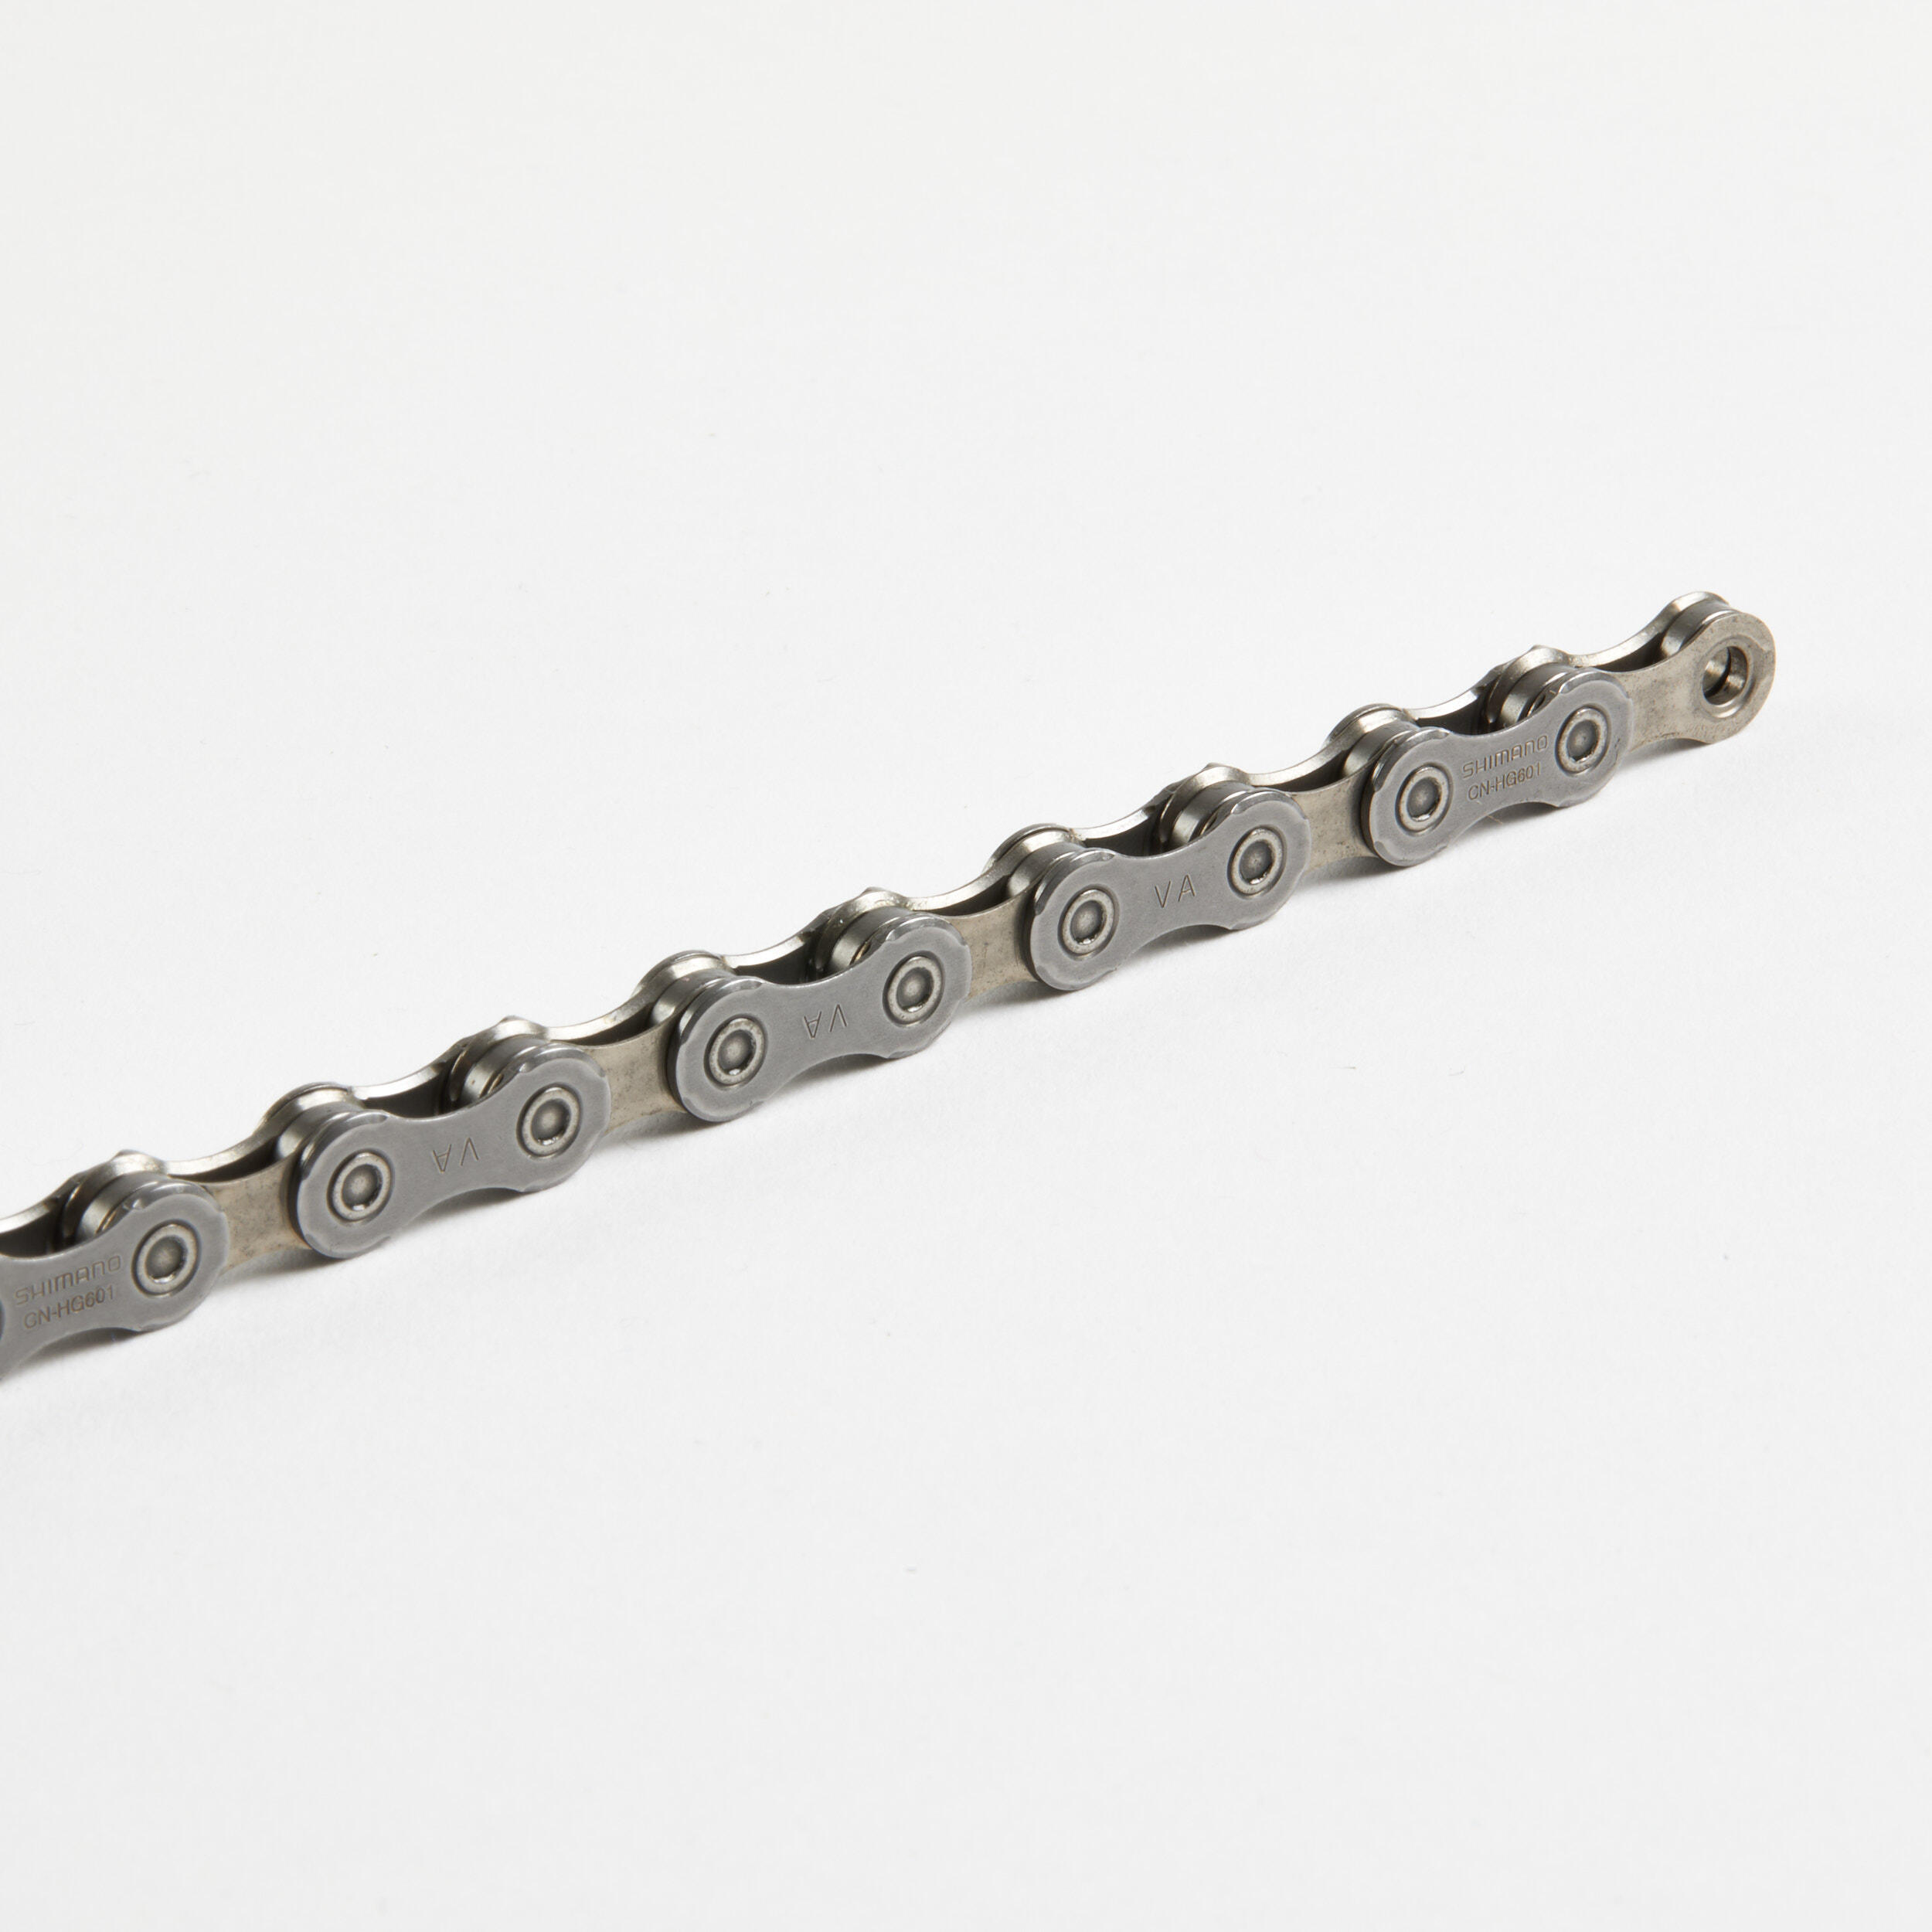 11-Speed Road/Mountain Bike Chain Shimano 105 CN-HG601 116L Quick Link 5/5